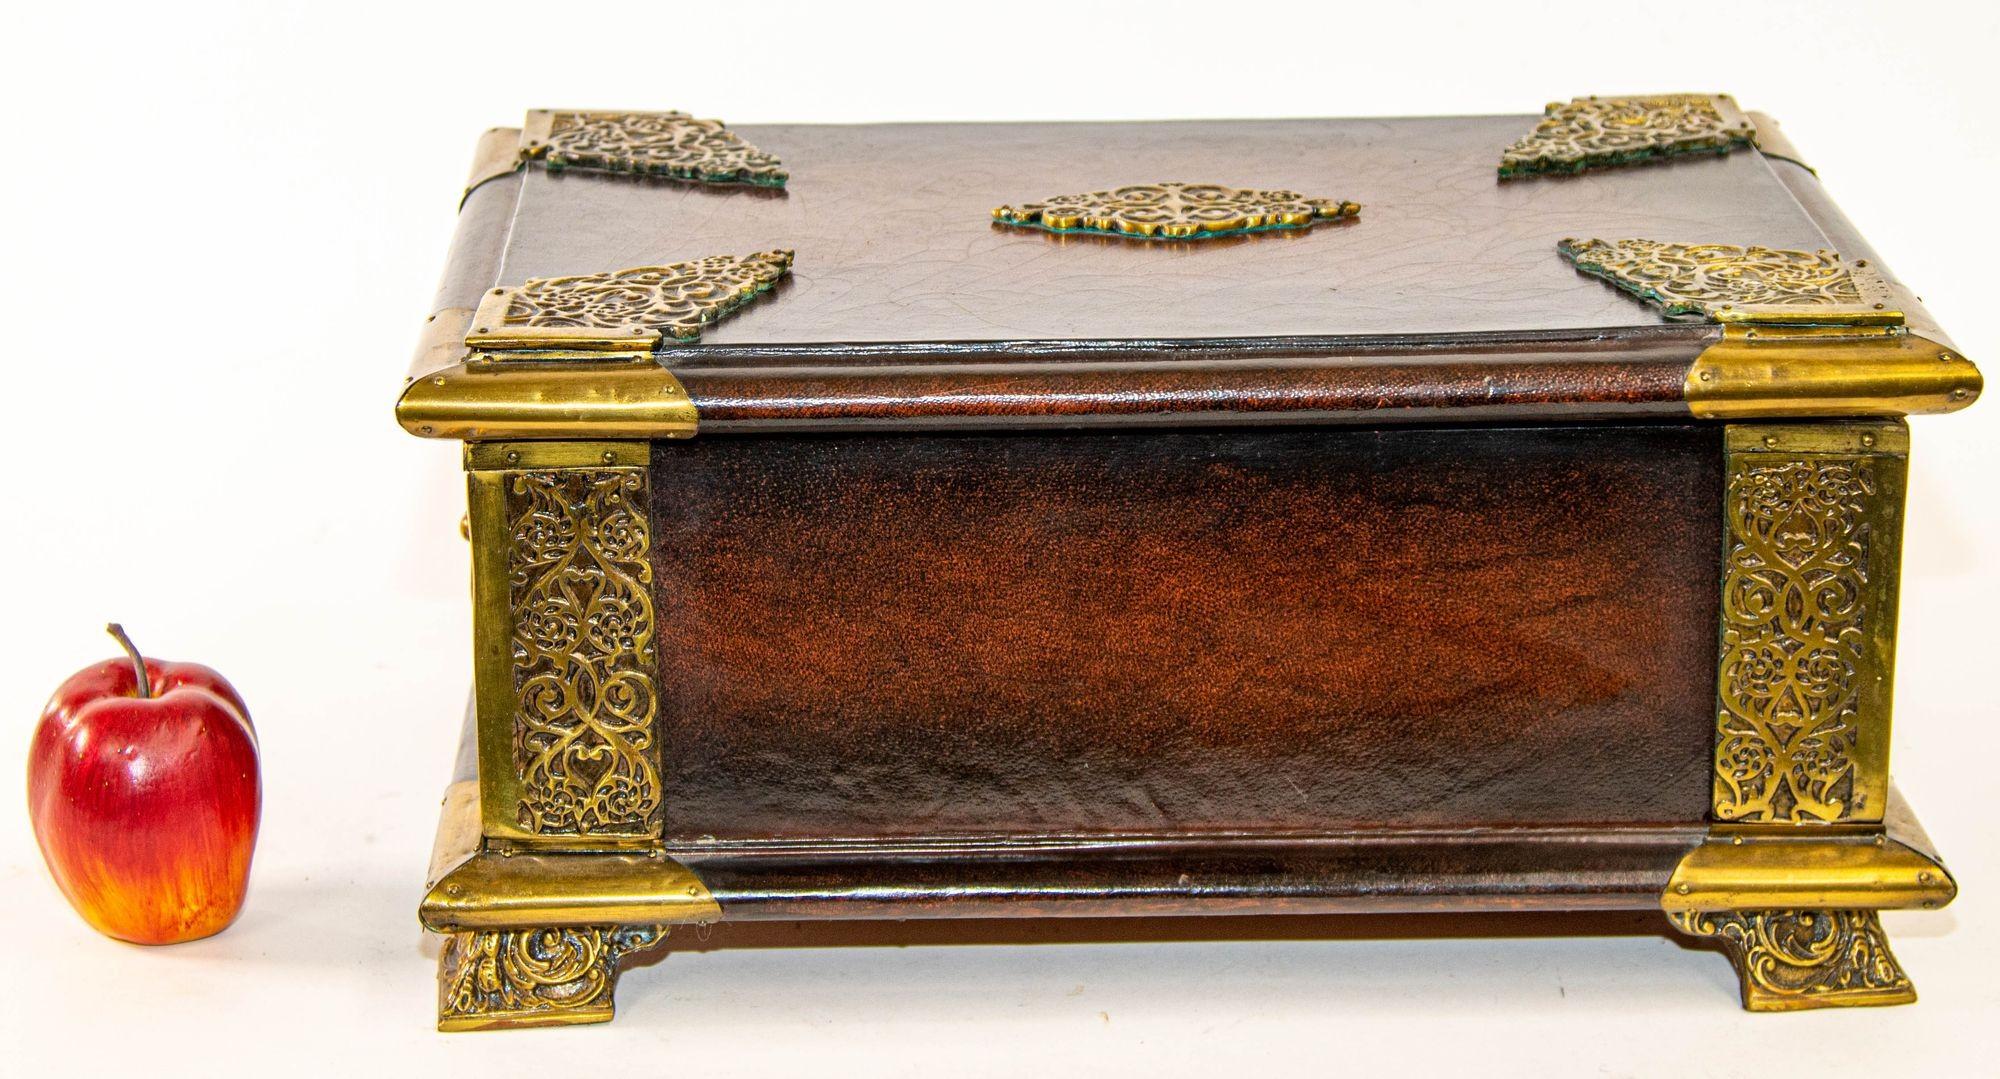 Italian Brown Leather Jewelry Box with Gold Tooling.
Large Italian gilt tooled leather wrapped table box, with domed top gilt decoration, raised on four bronze paw feet.
Vintage leather wrapped trunk with solid brass ornate feet, the top opens to